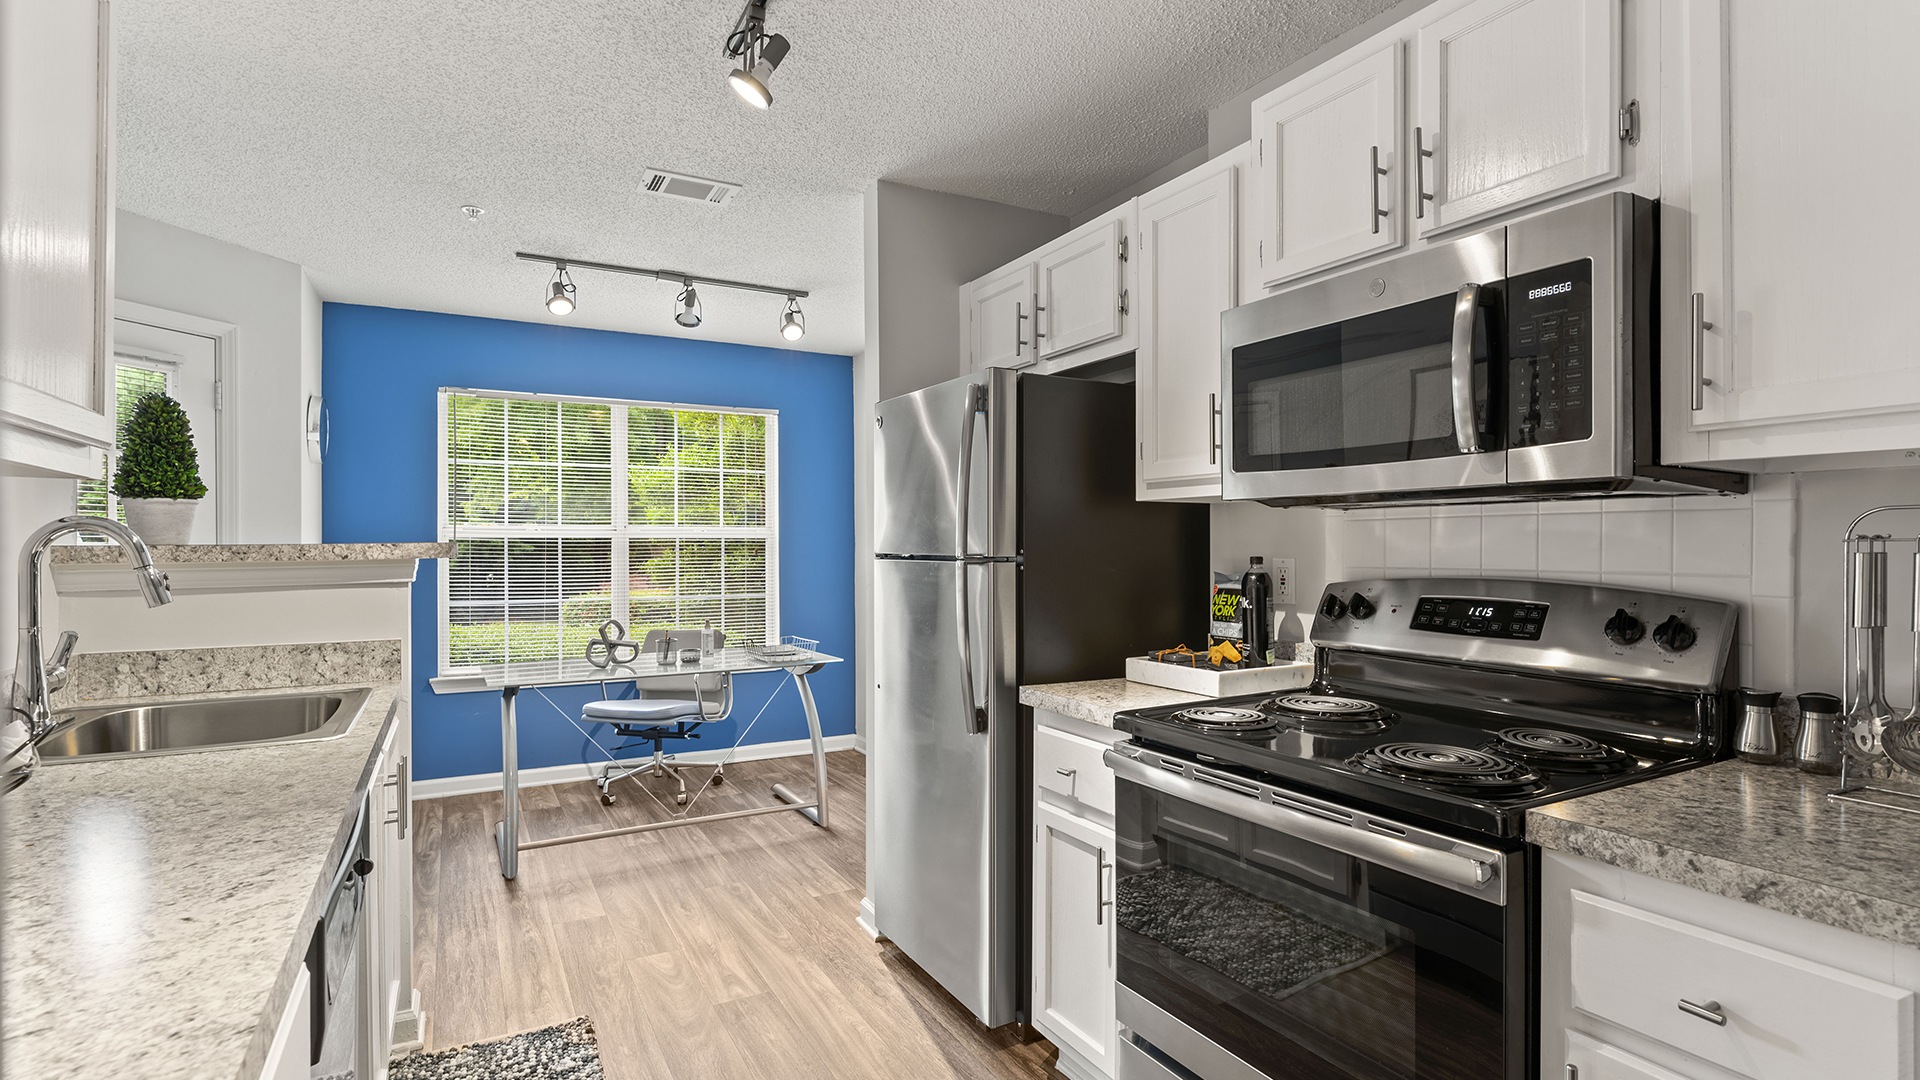 Kitchen with Energy-Efficient, Stainless Steel Appliances and Cabinets for Storage at Our Apartments in Austell